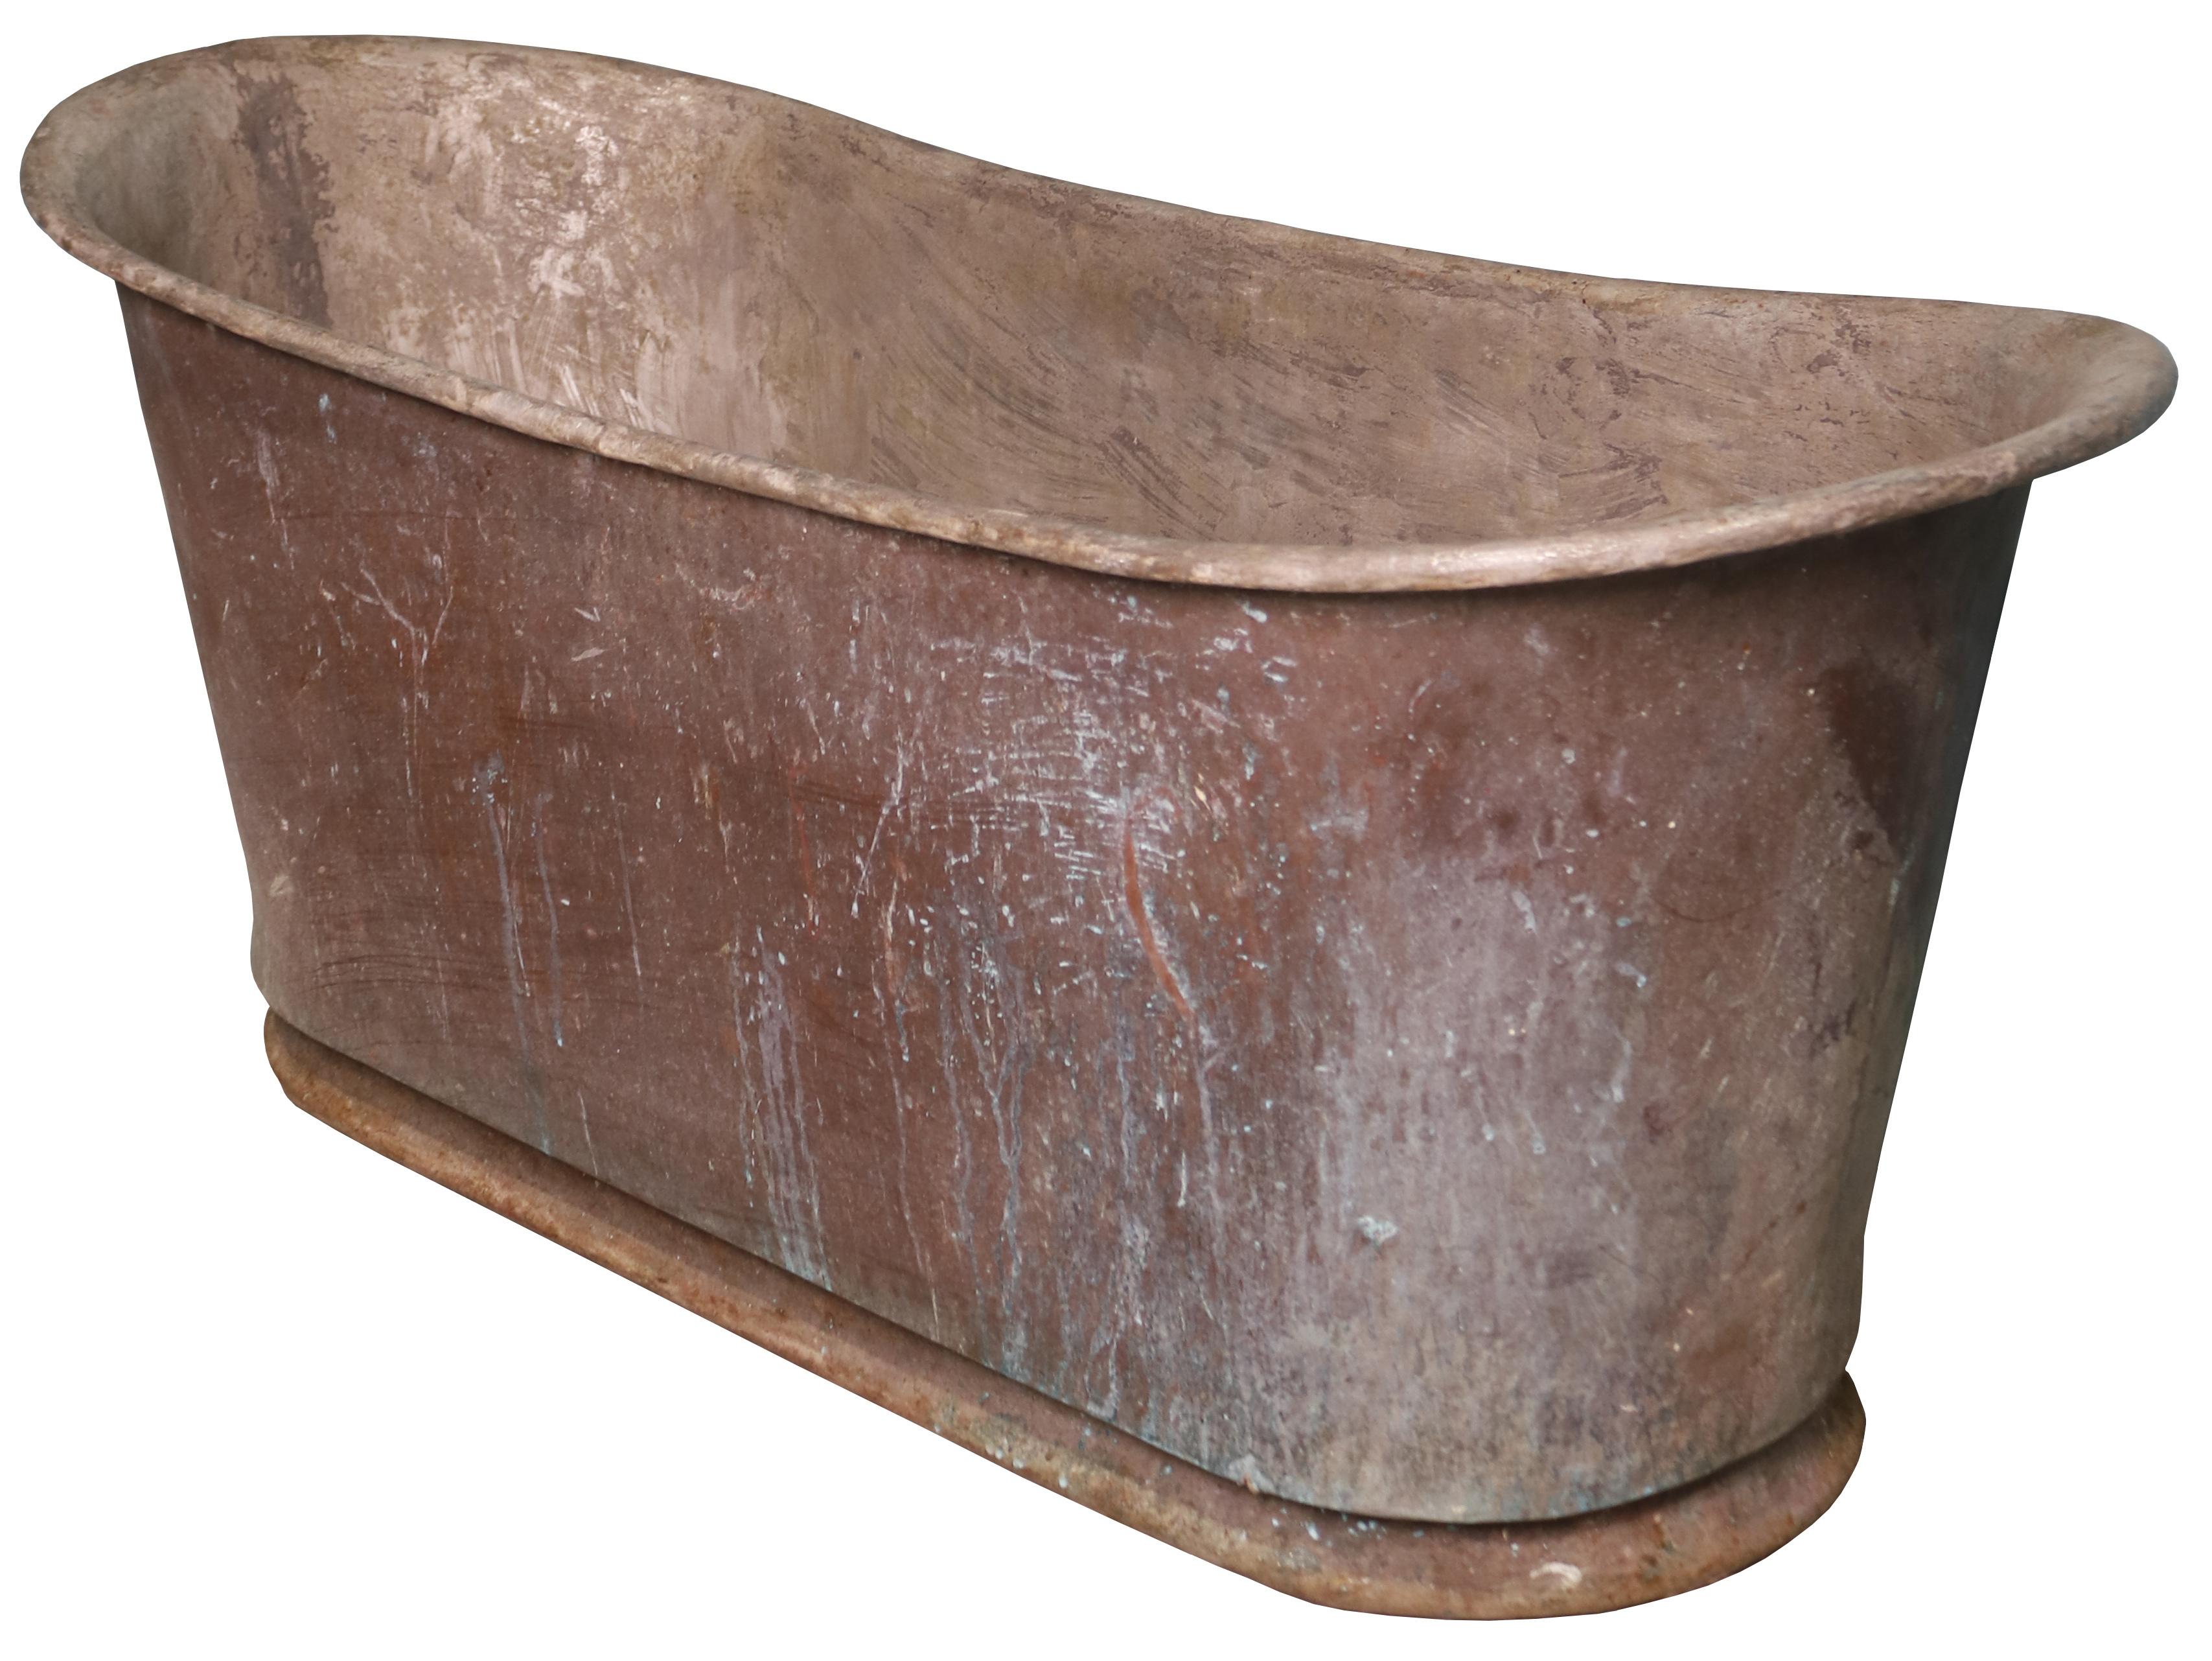 Antique copper double ended bath. A beautiful Zinc coated, copper bath with a rolled top salvaged from an Oxfordshire country home. A perfect way to add some rustic charm to a contemporary space.